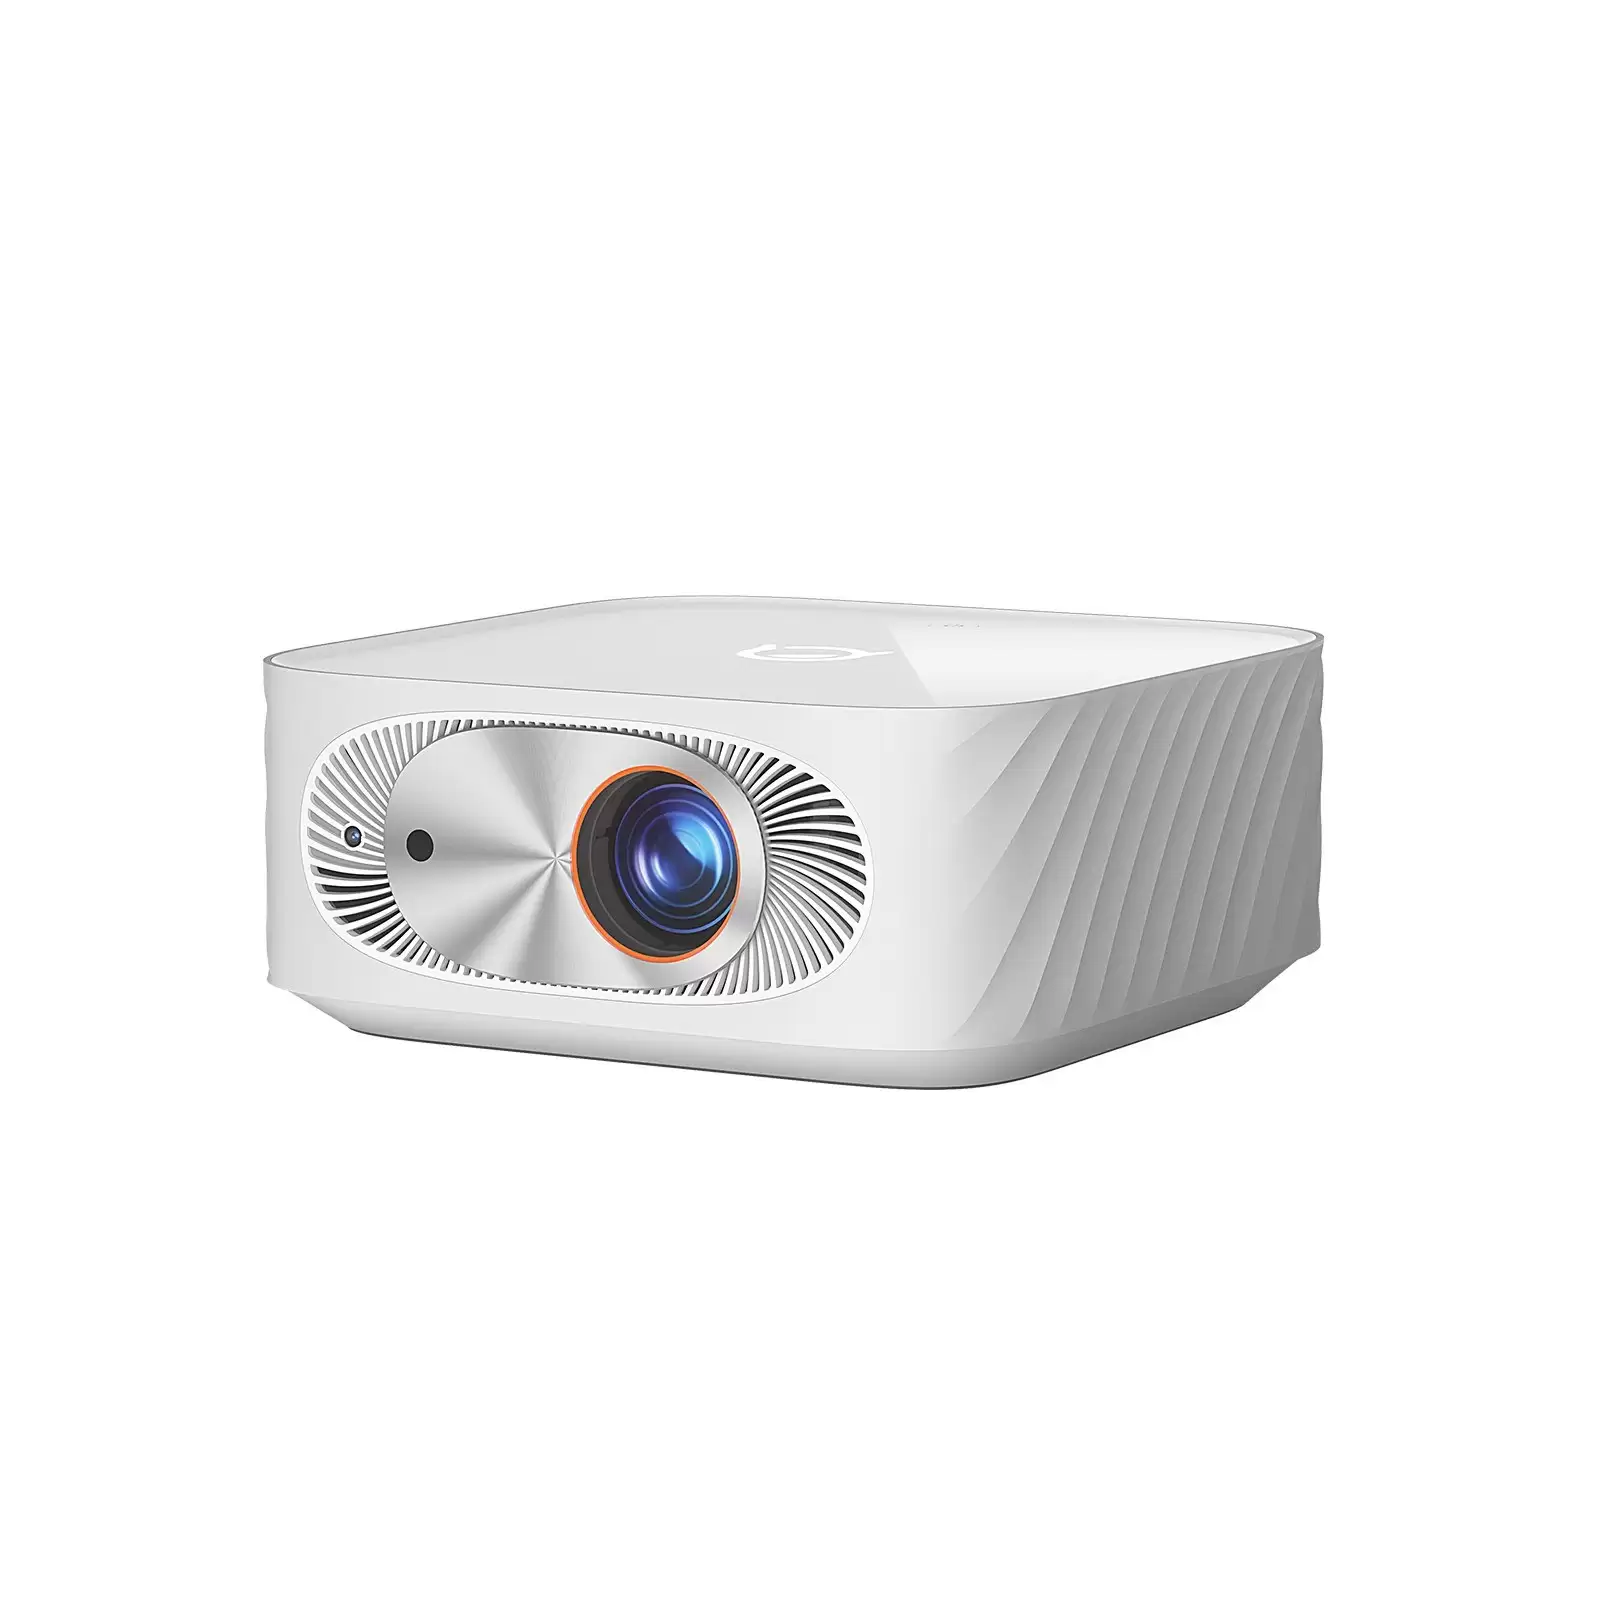 Order In Just $176.69 From Eu Warehouse Lenovo Xiaoxin 100 Projector 700ansi Lumens 1080p At Tomtop